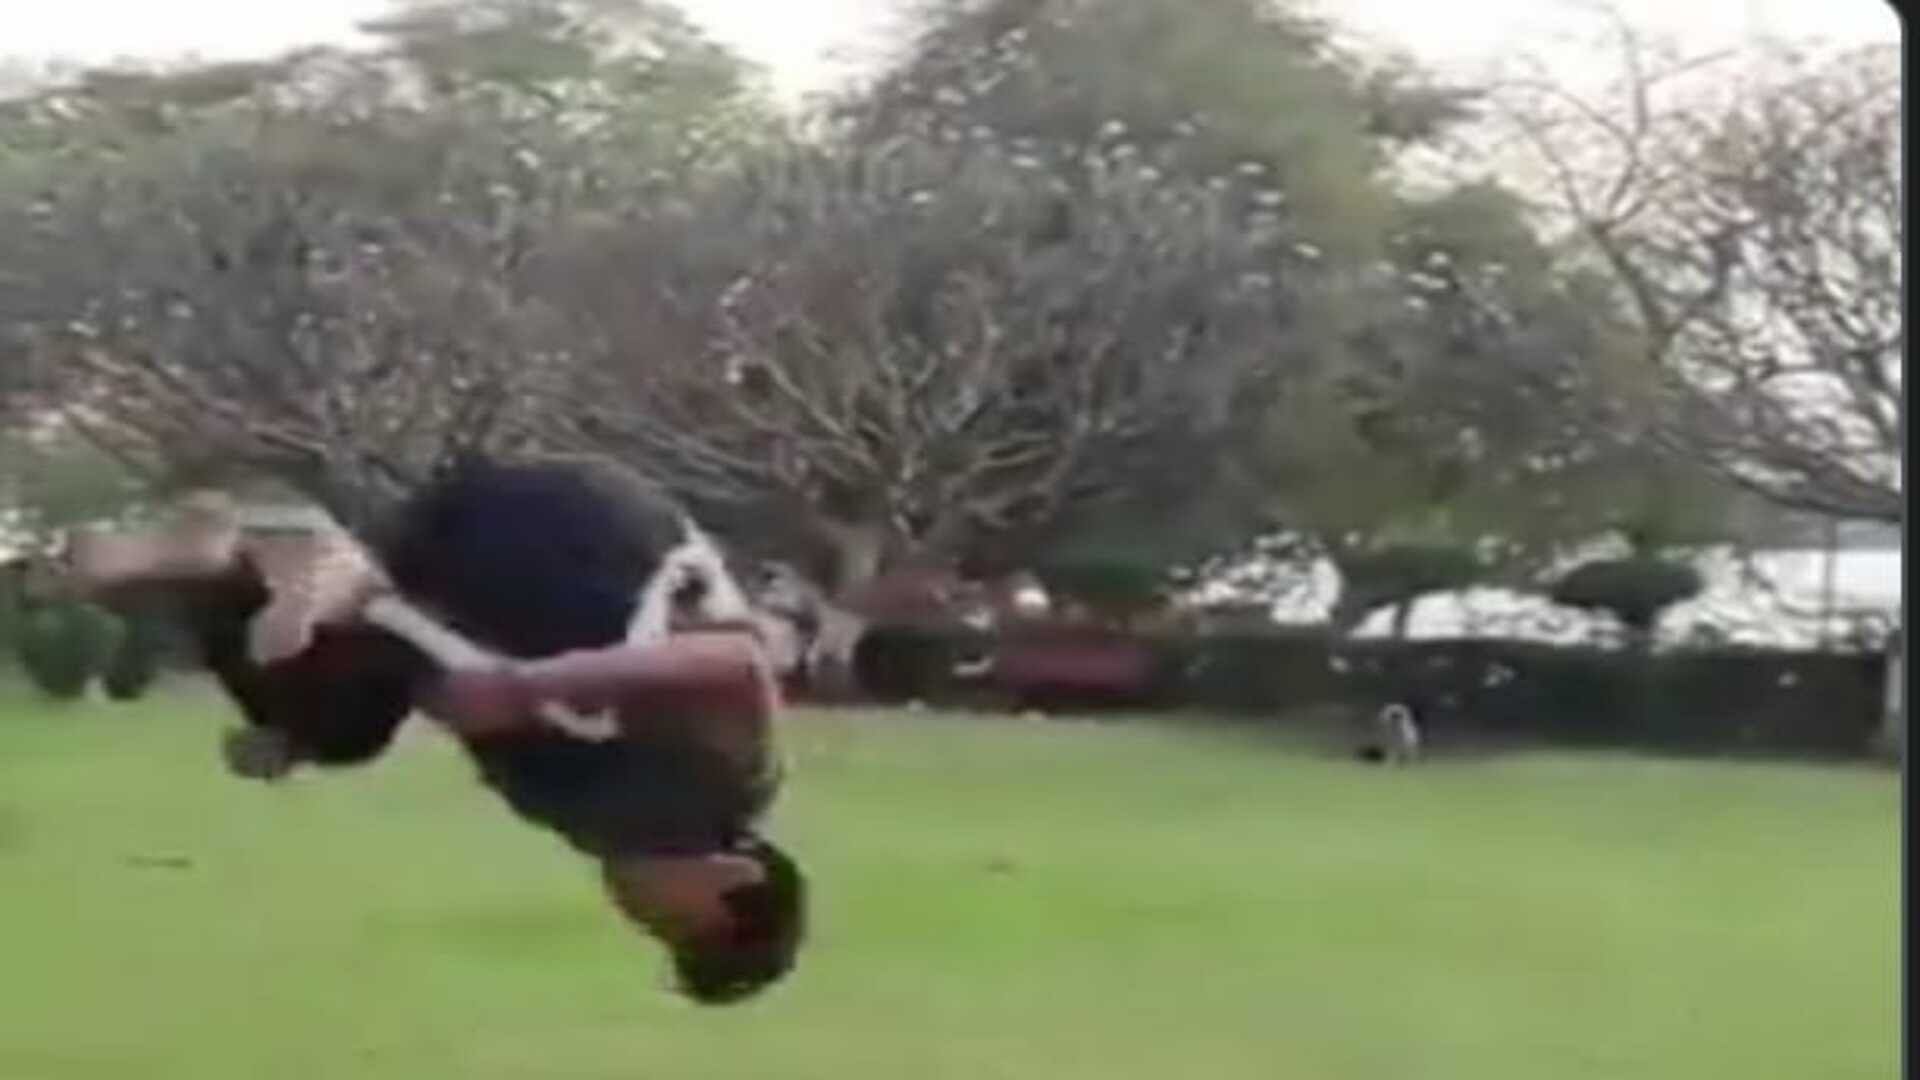 Boy doing backflip in a park and a monkey watching this know what happened